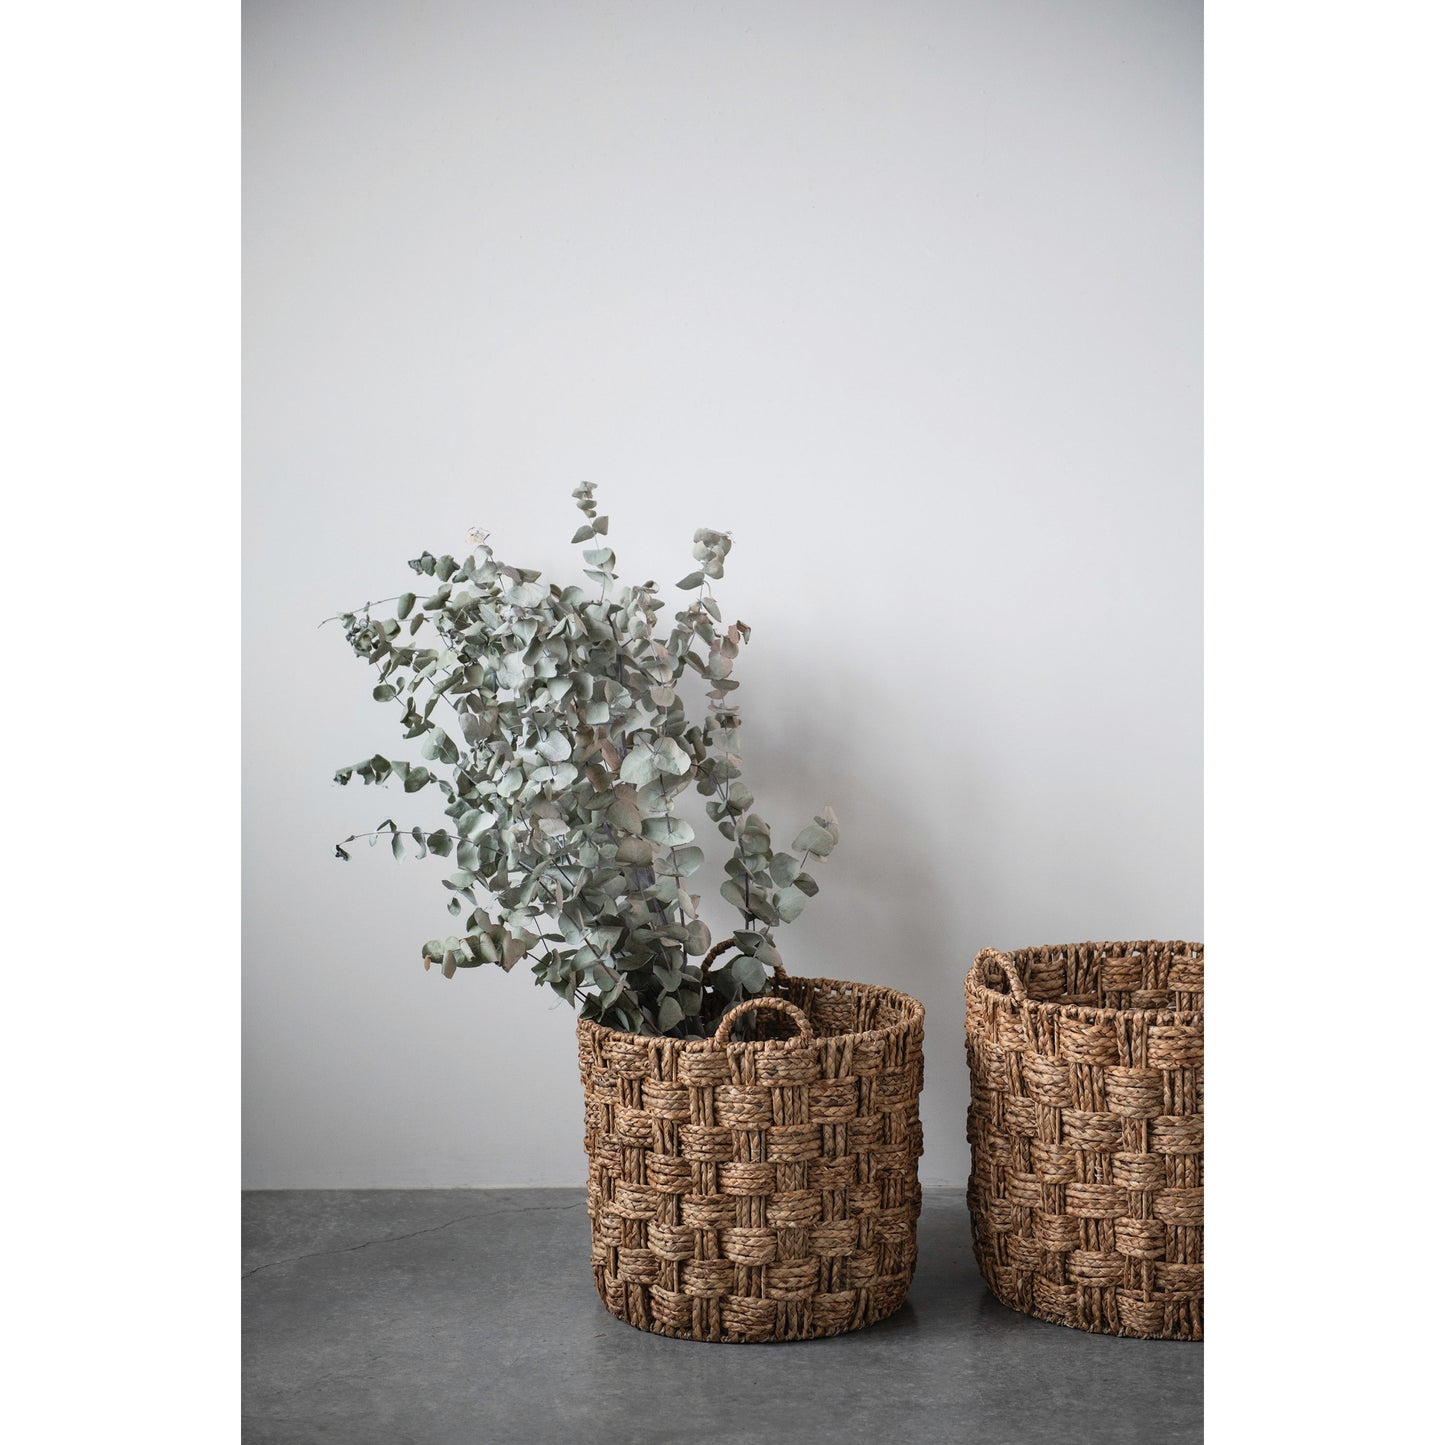 Hand-Woven Seagrass and Metal Baskets, feathered farmhouse 